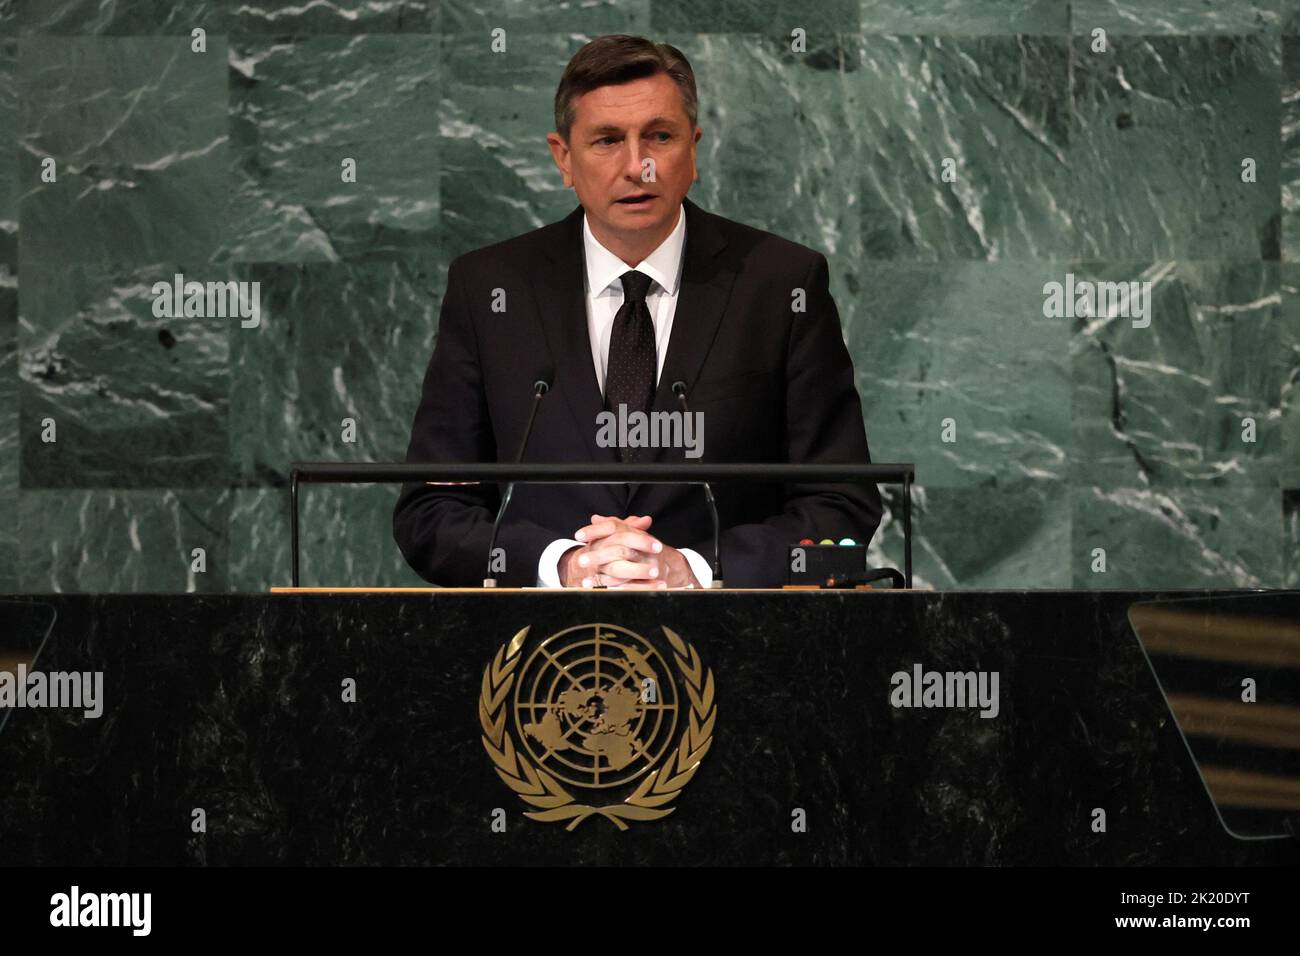 Slovenia's President Borut Pahor addresses the 77th Session of the United Nations General Assembly at U.N. Headquarters in New York City, U.S., September 21, 2022. REUTERS/Brendan McDermid Stock Photo